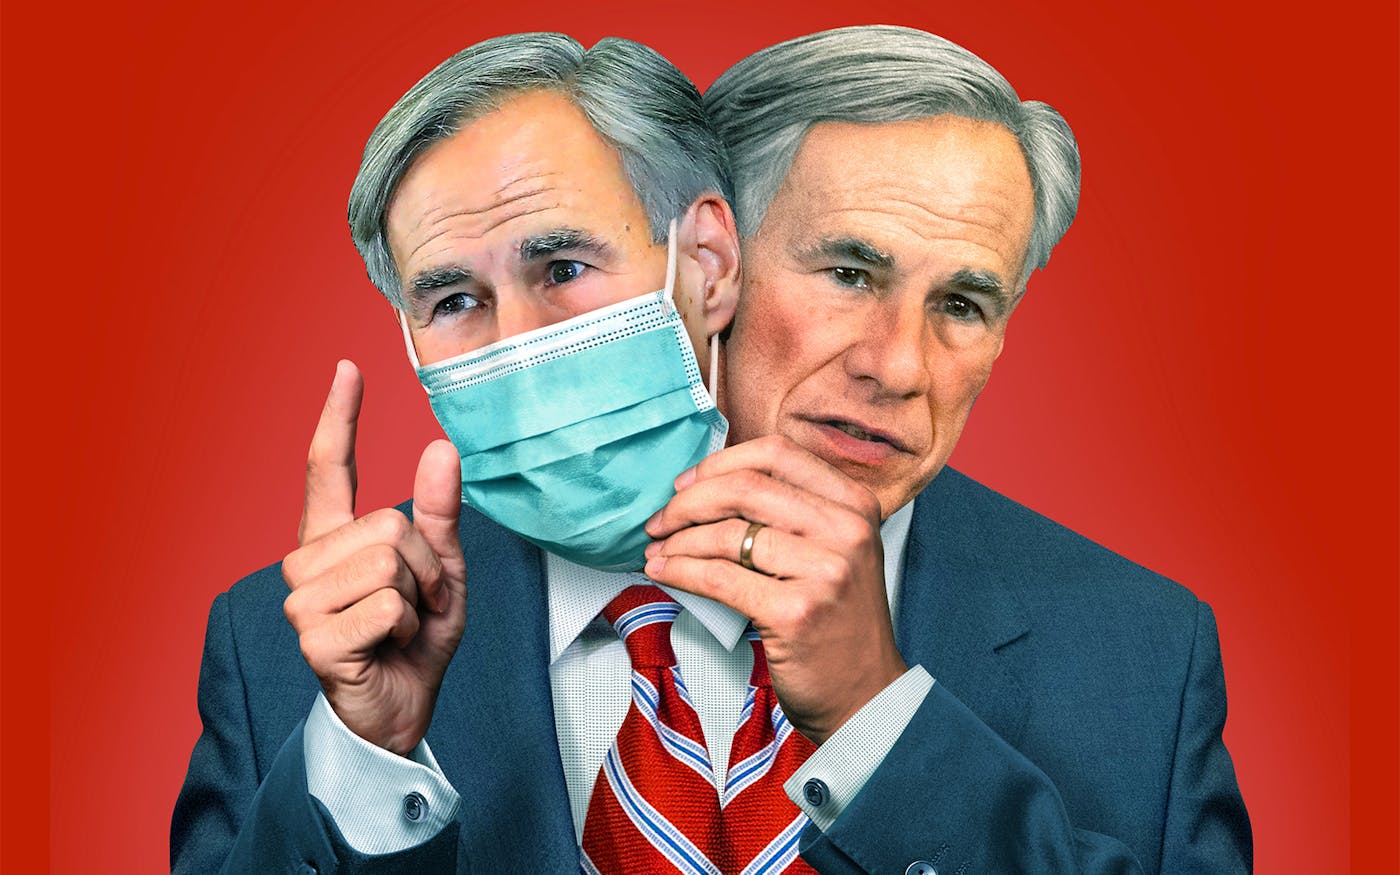 Greg Abbott S Penchant For The Path Of Least Resistance Has Led Texas To Disaster Texas Monthly